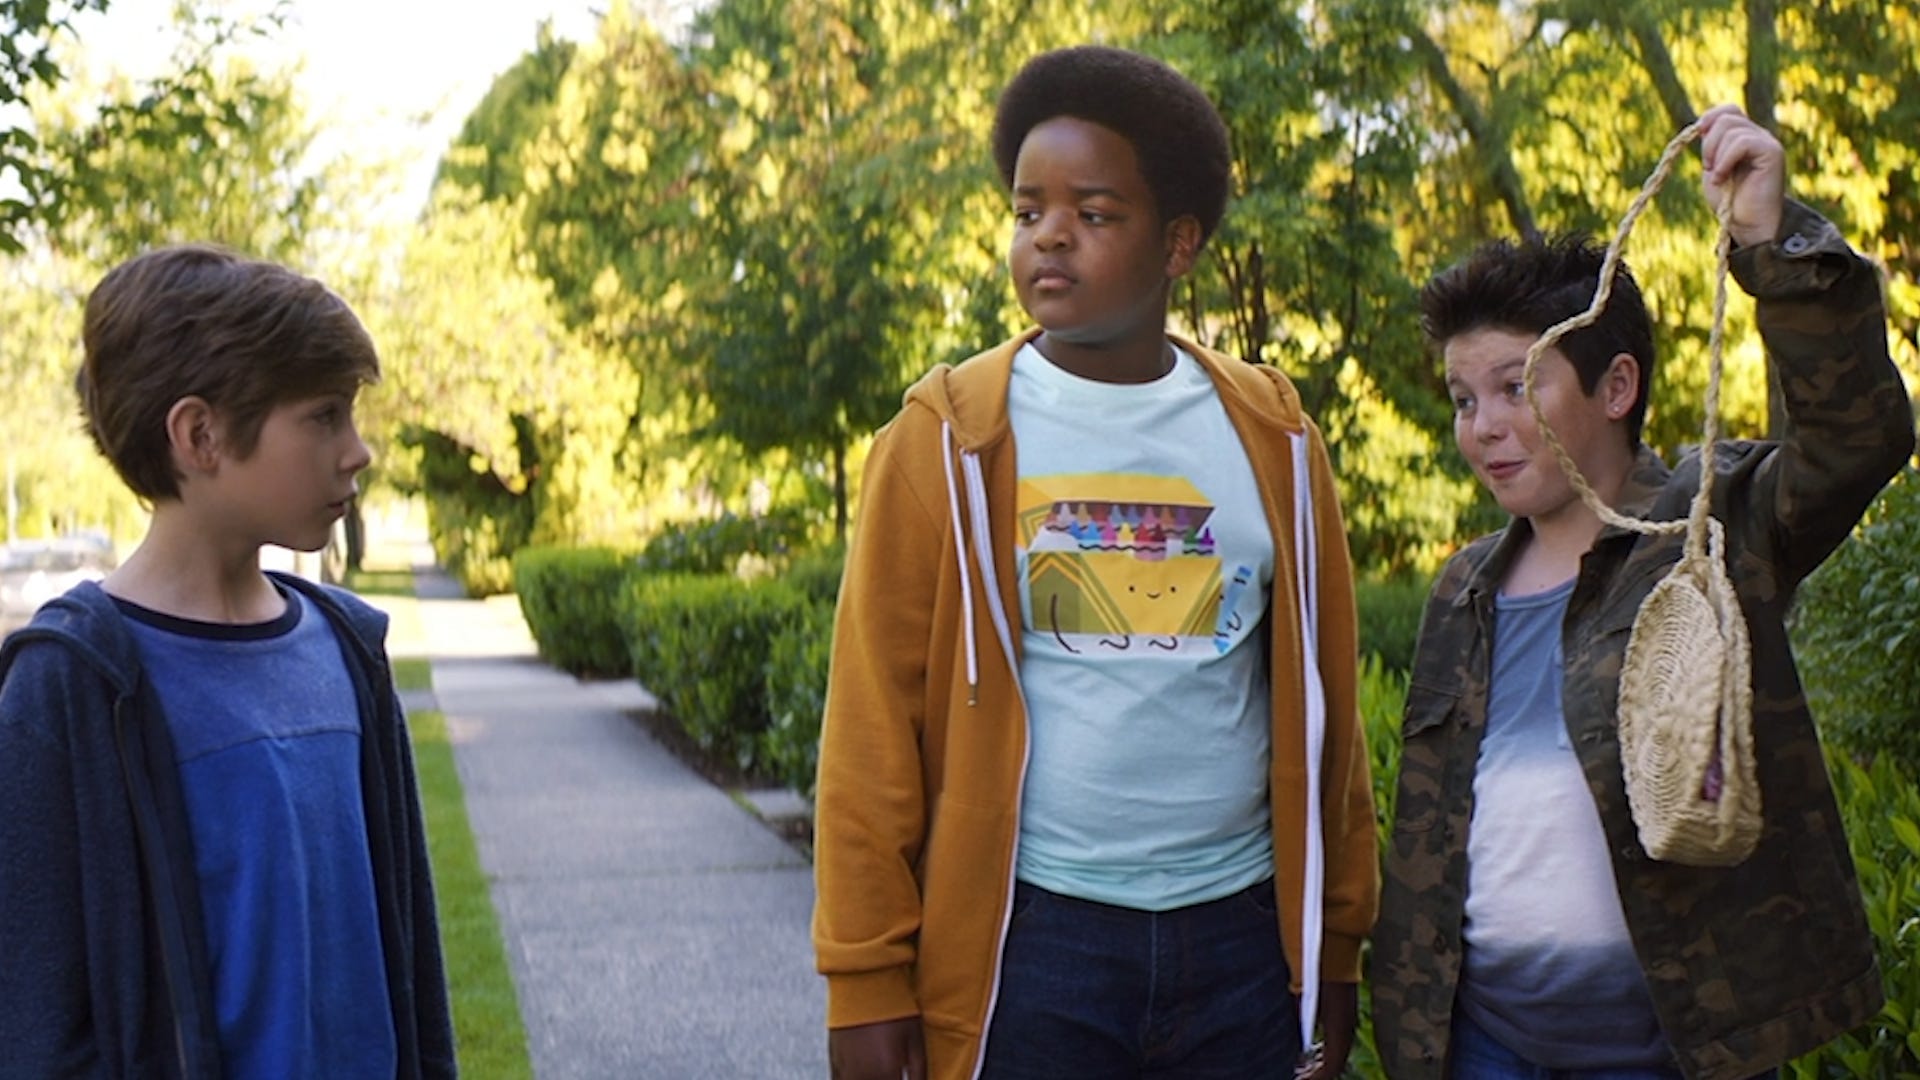 Three boys know how to get into trouble in 'Good Boys' trailer